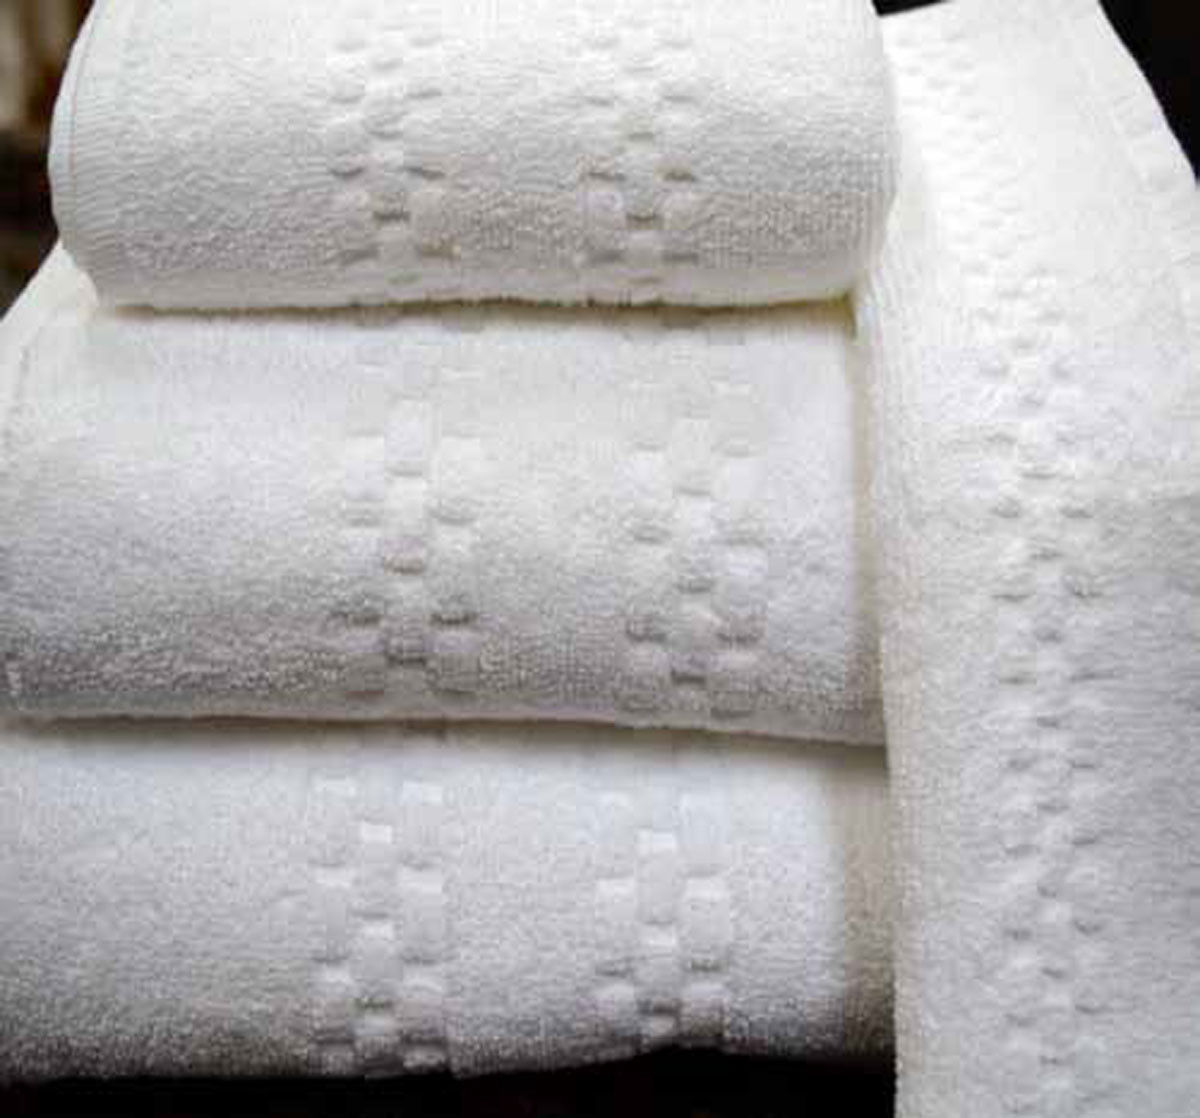 What are the three towels for in hotel?